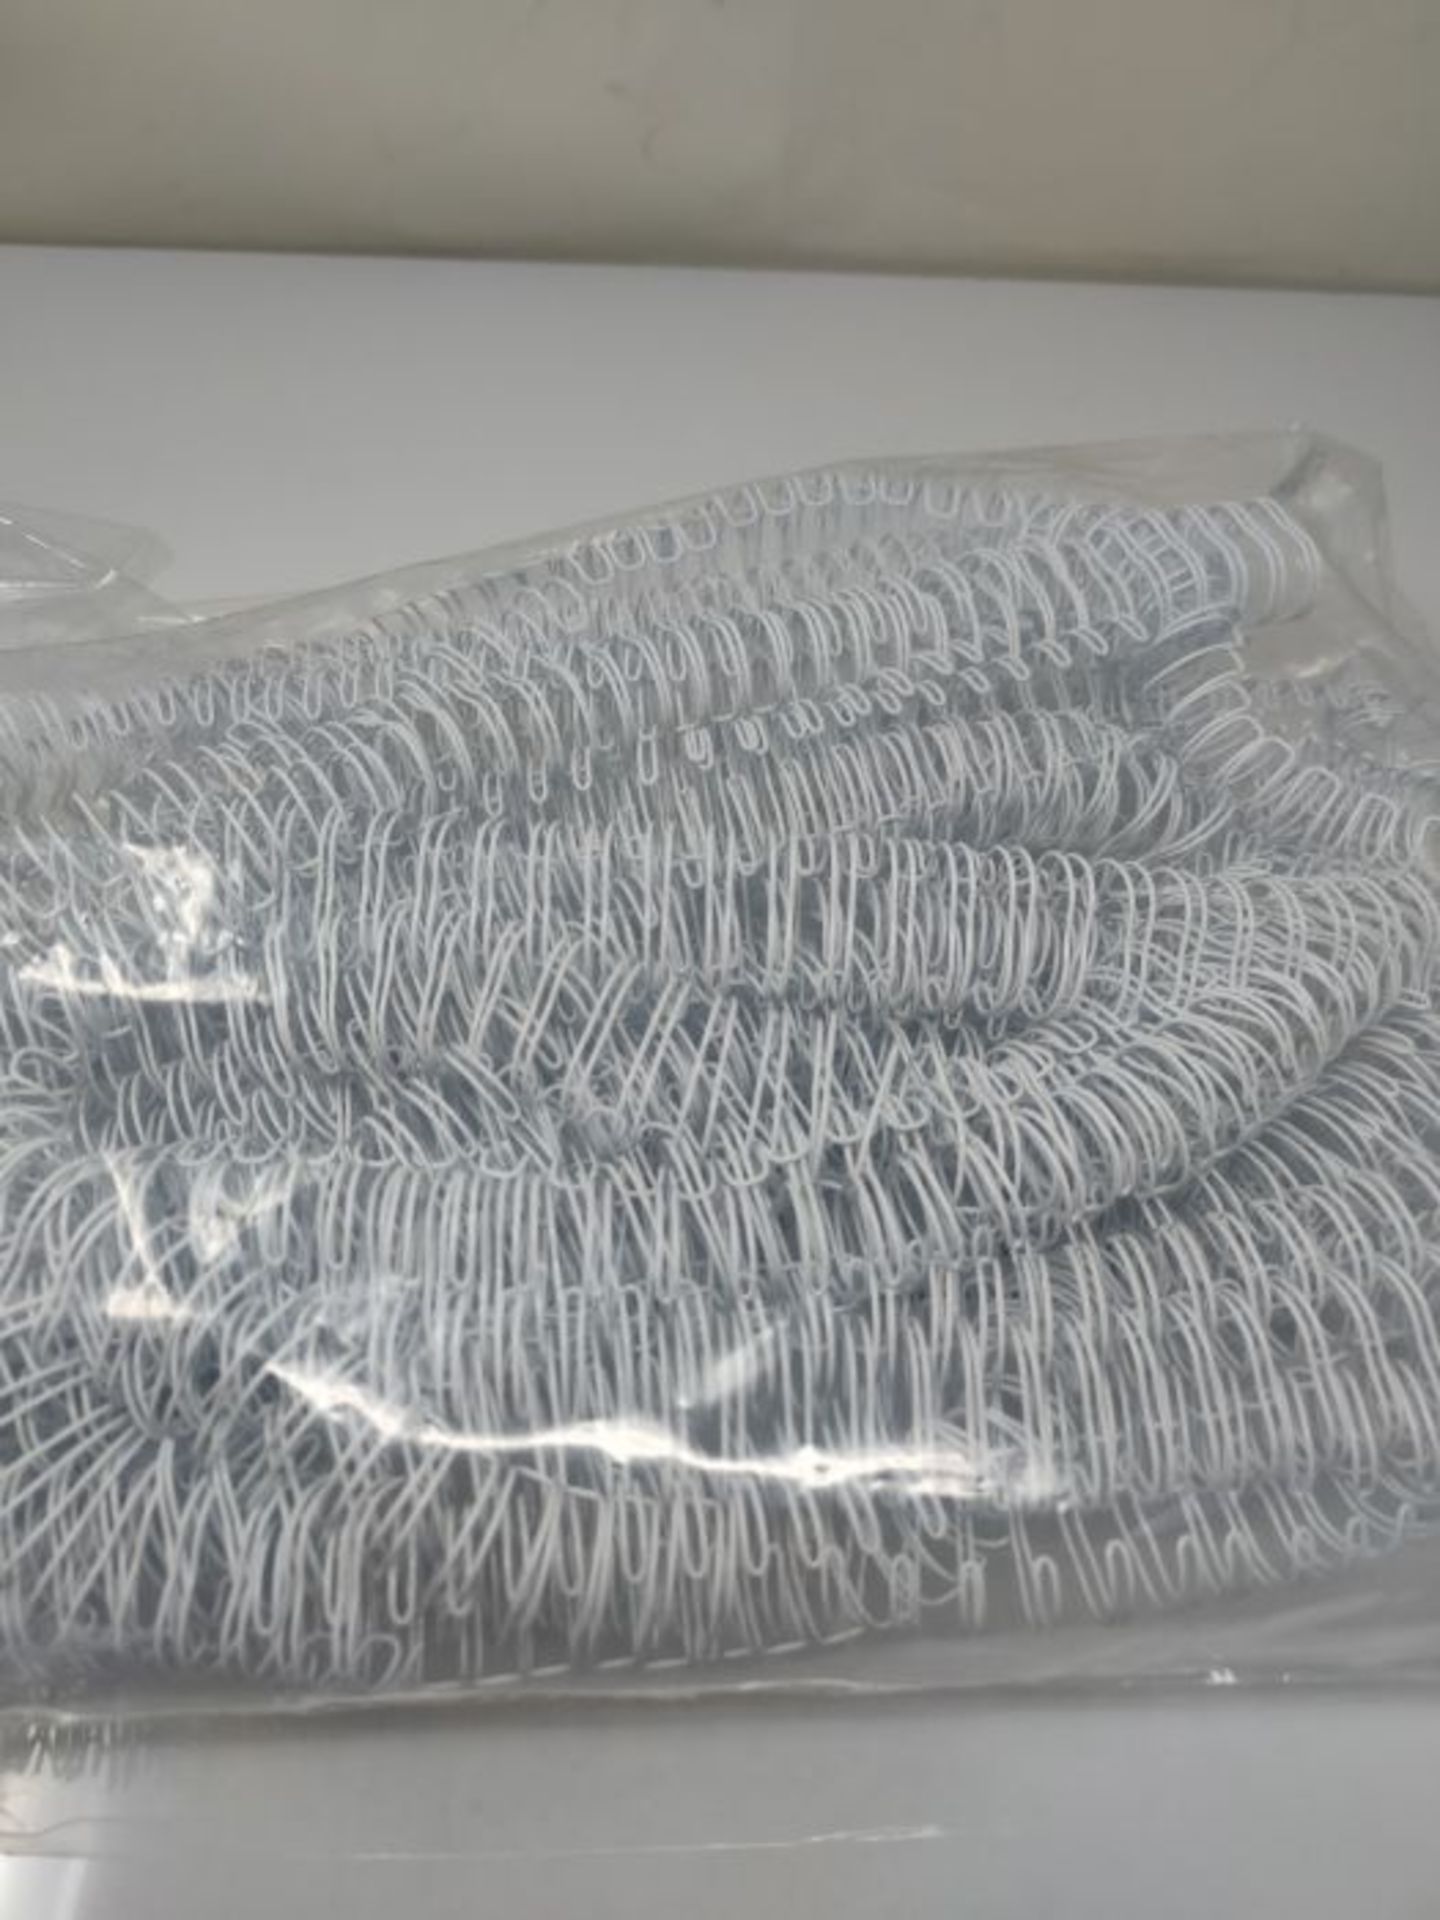 Renz 311600034 16.0 mm Ring Wire Cut Element - White. 3:1 Pitch. A4. 50 Wires per Box. - Image 2 of 2